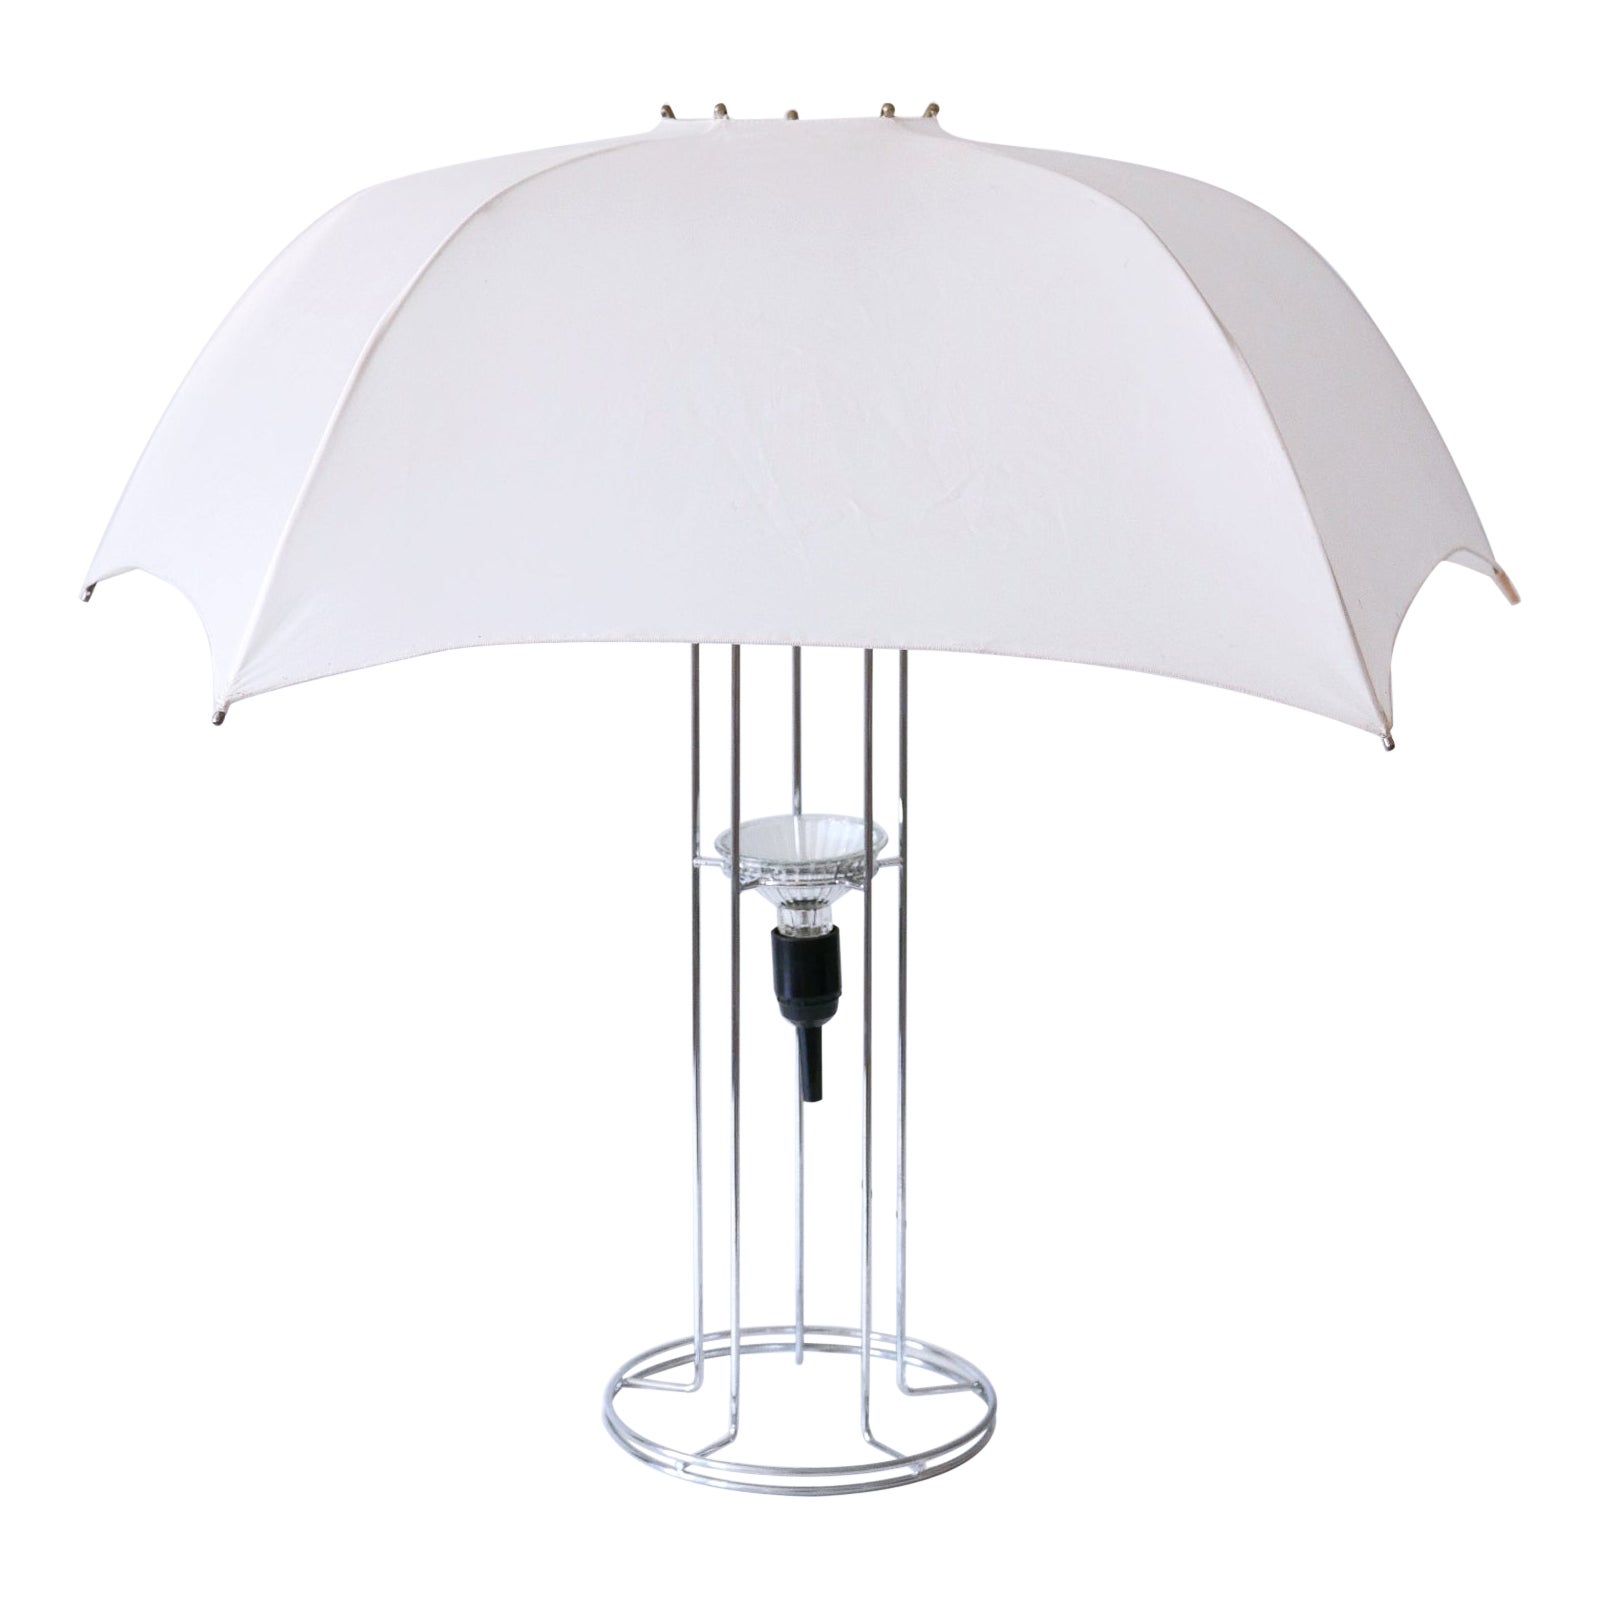 Large and Amazing 'Umbrella' Table Lamp by Gijs Bakker for Artimeta 1970s